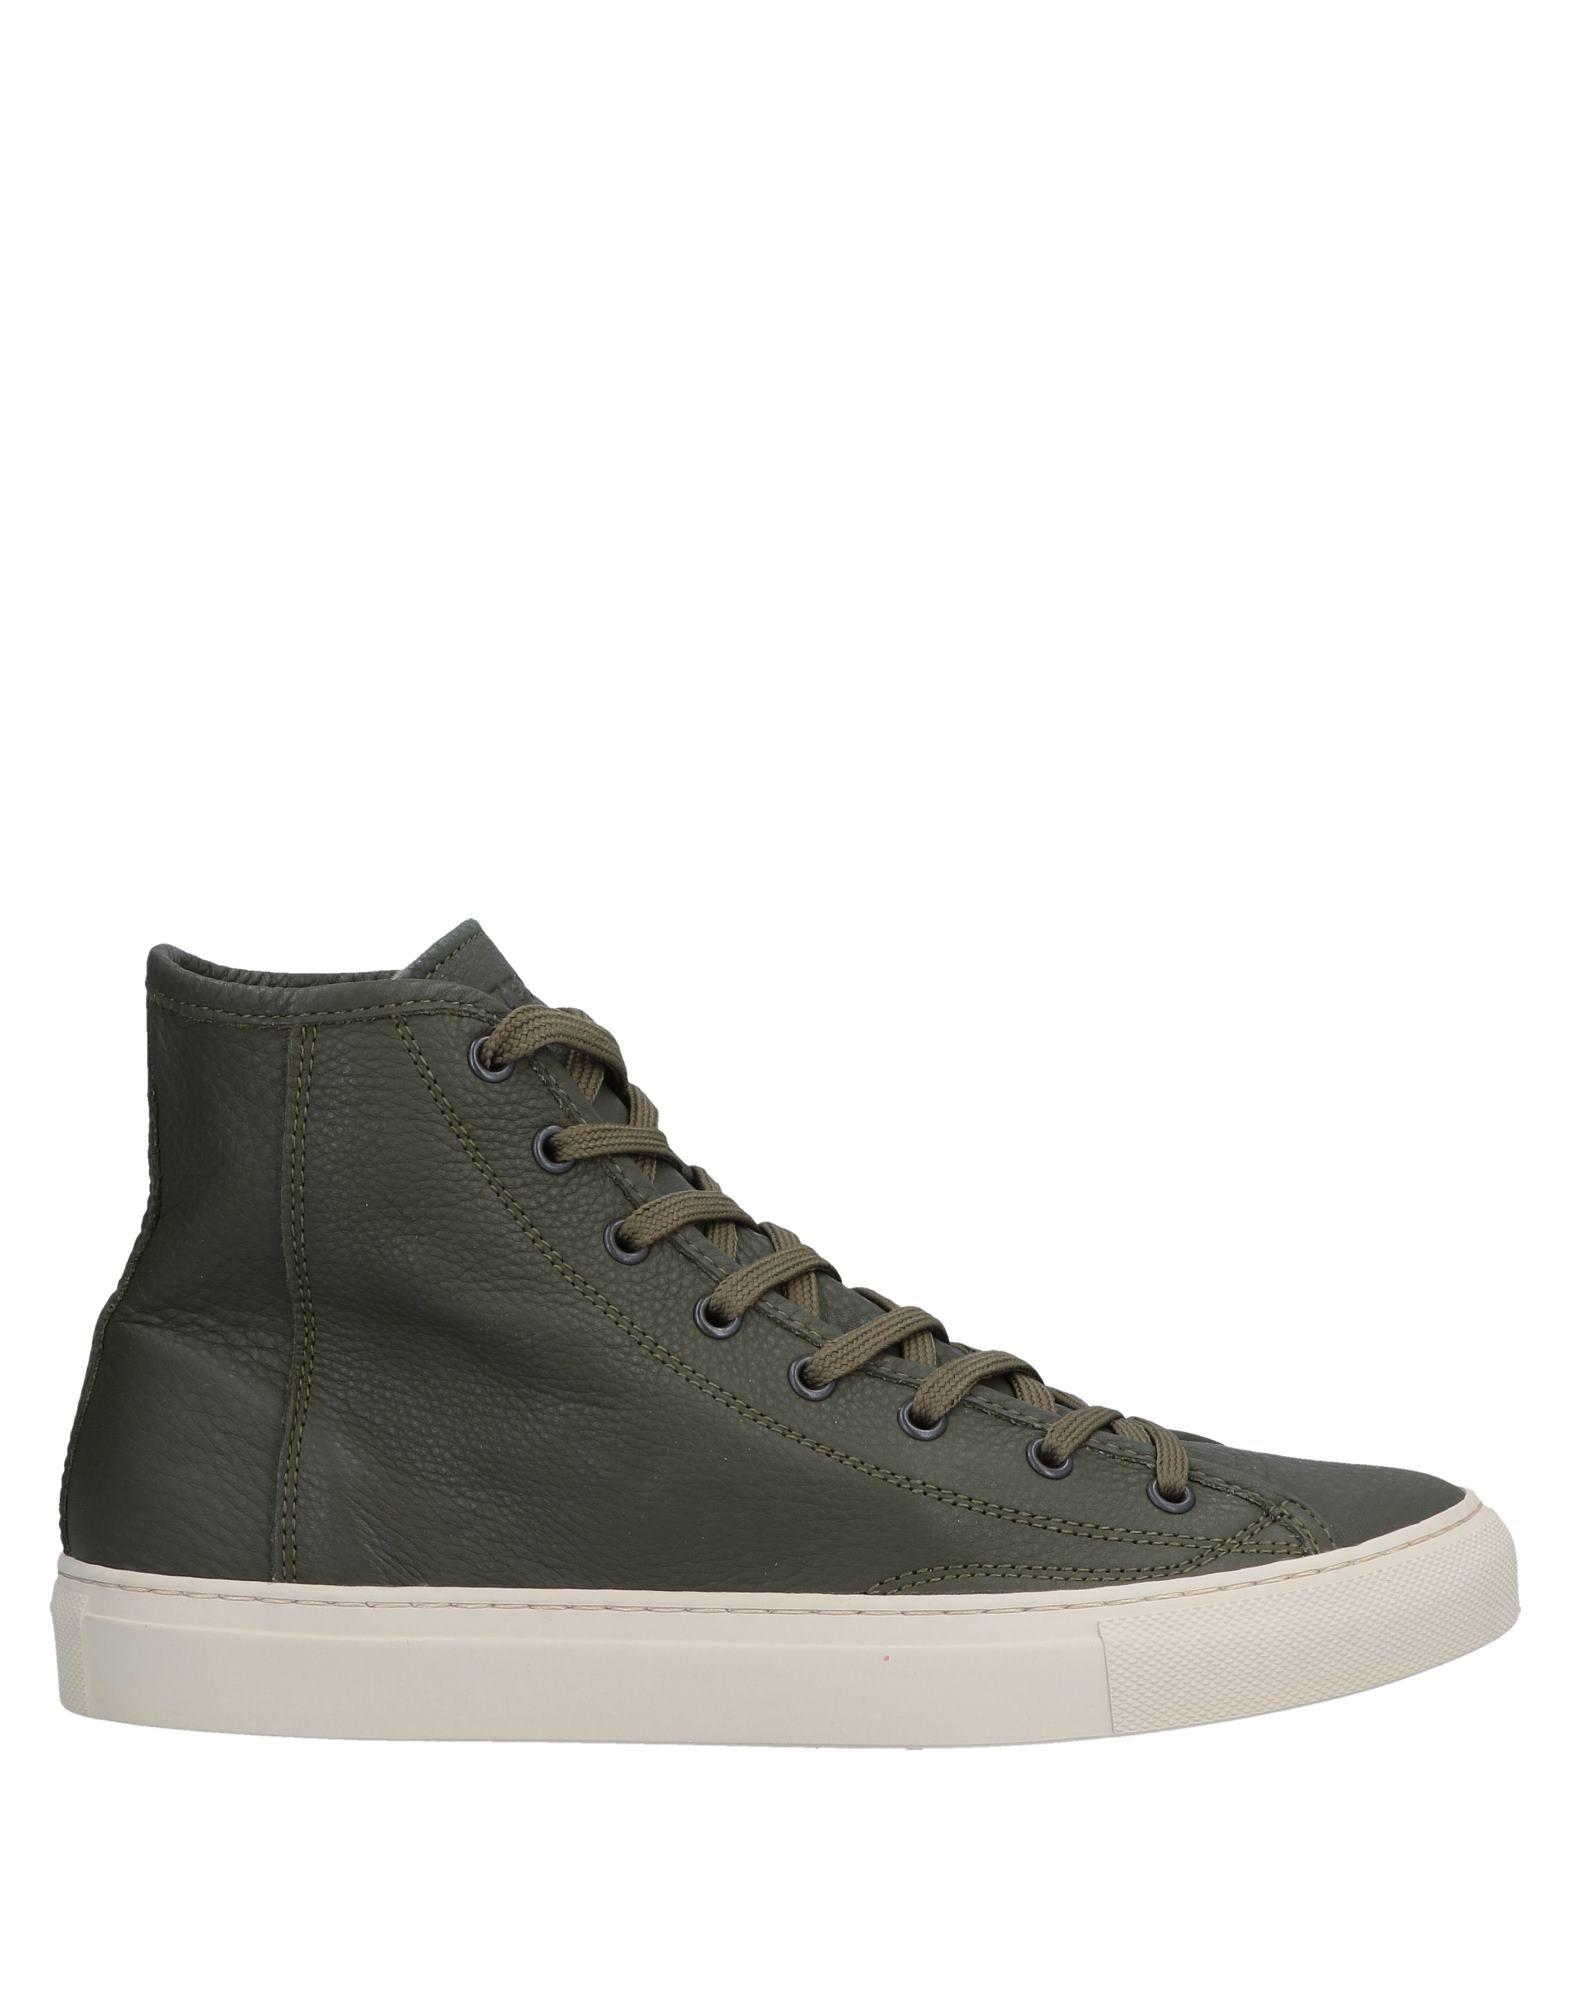 Diemme Leather High-tops & Sneakers in Military Green (Green) for Men ...